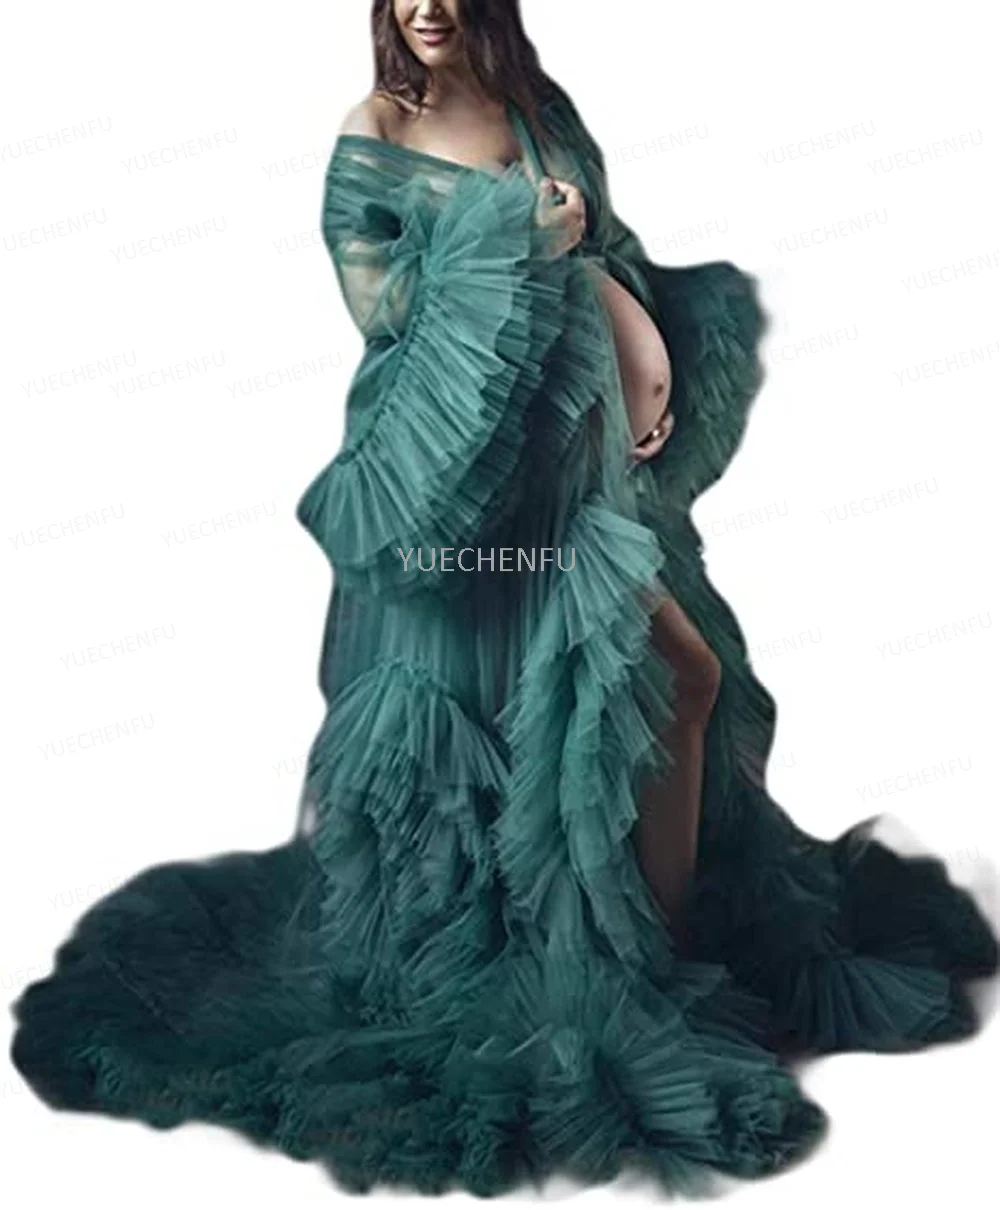 

Women Robes Perspective Sheer Dressing Gown Long Tulle Puffy Bathrobe Wedding Nightgown Pregnancy Photoshoot Dress